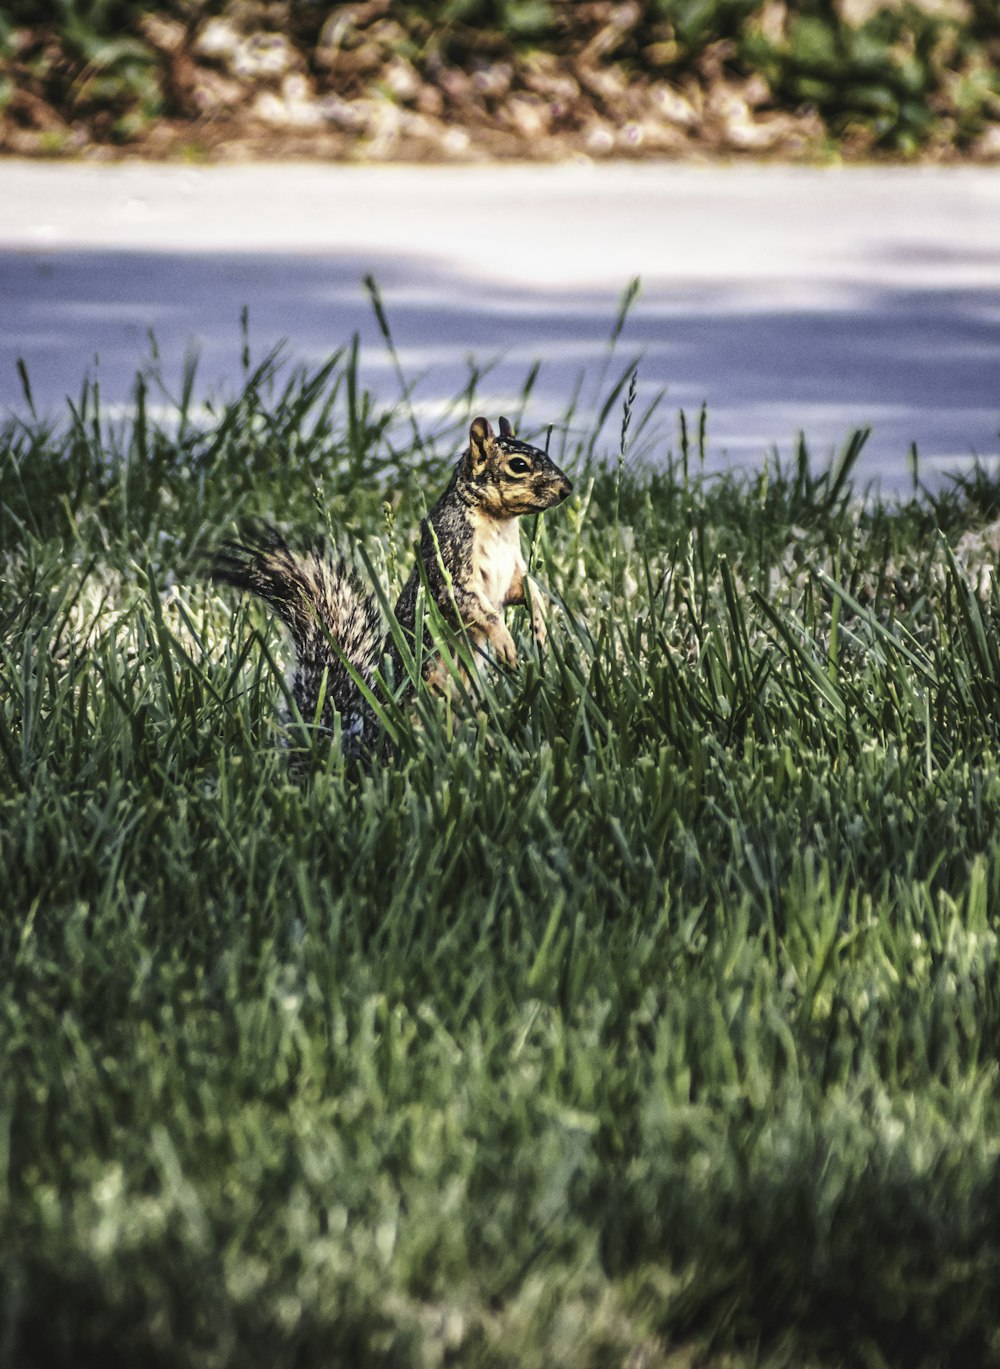 a squirrel in the grass